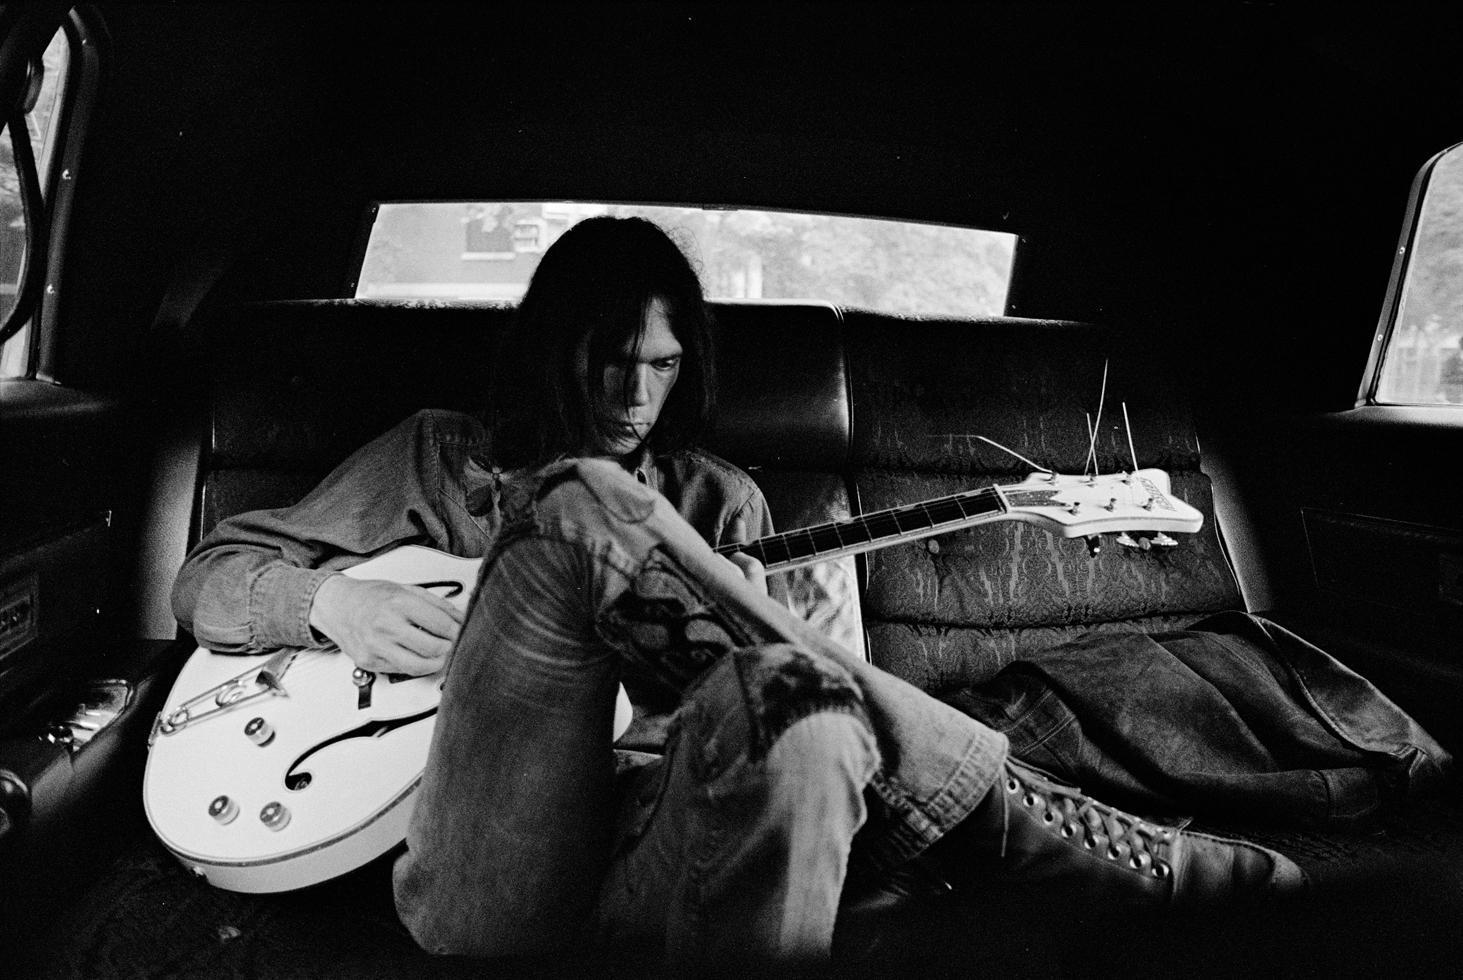 Joel Bernstein Black and White Photograph - Neil Young back of Limo 30x40